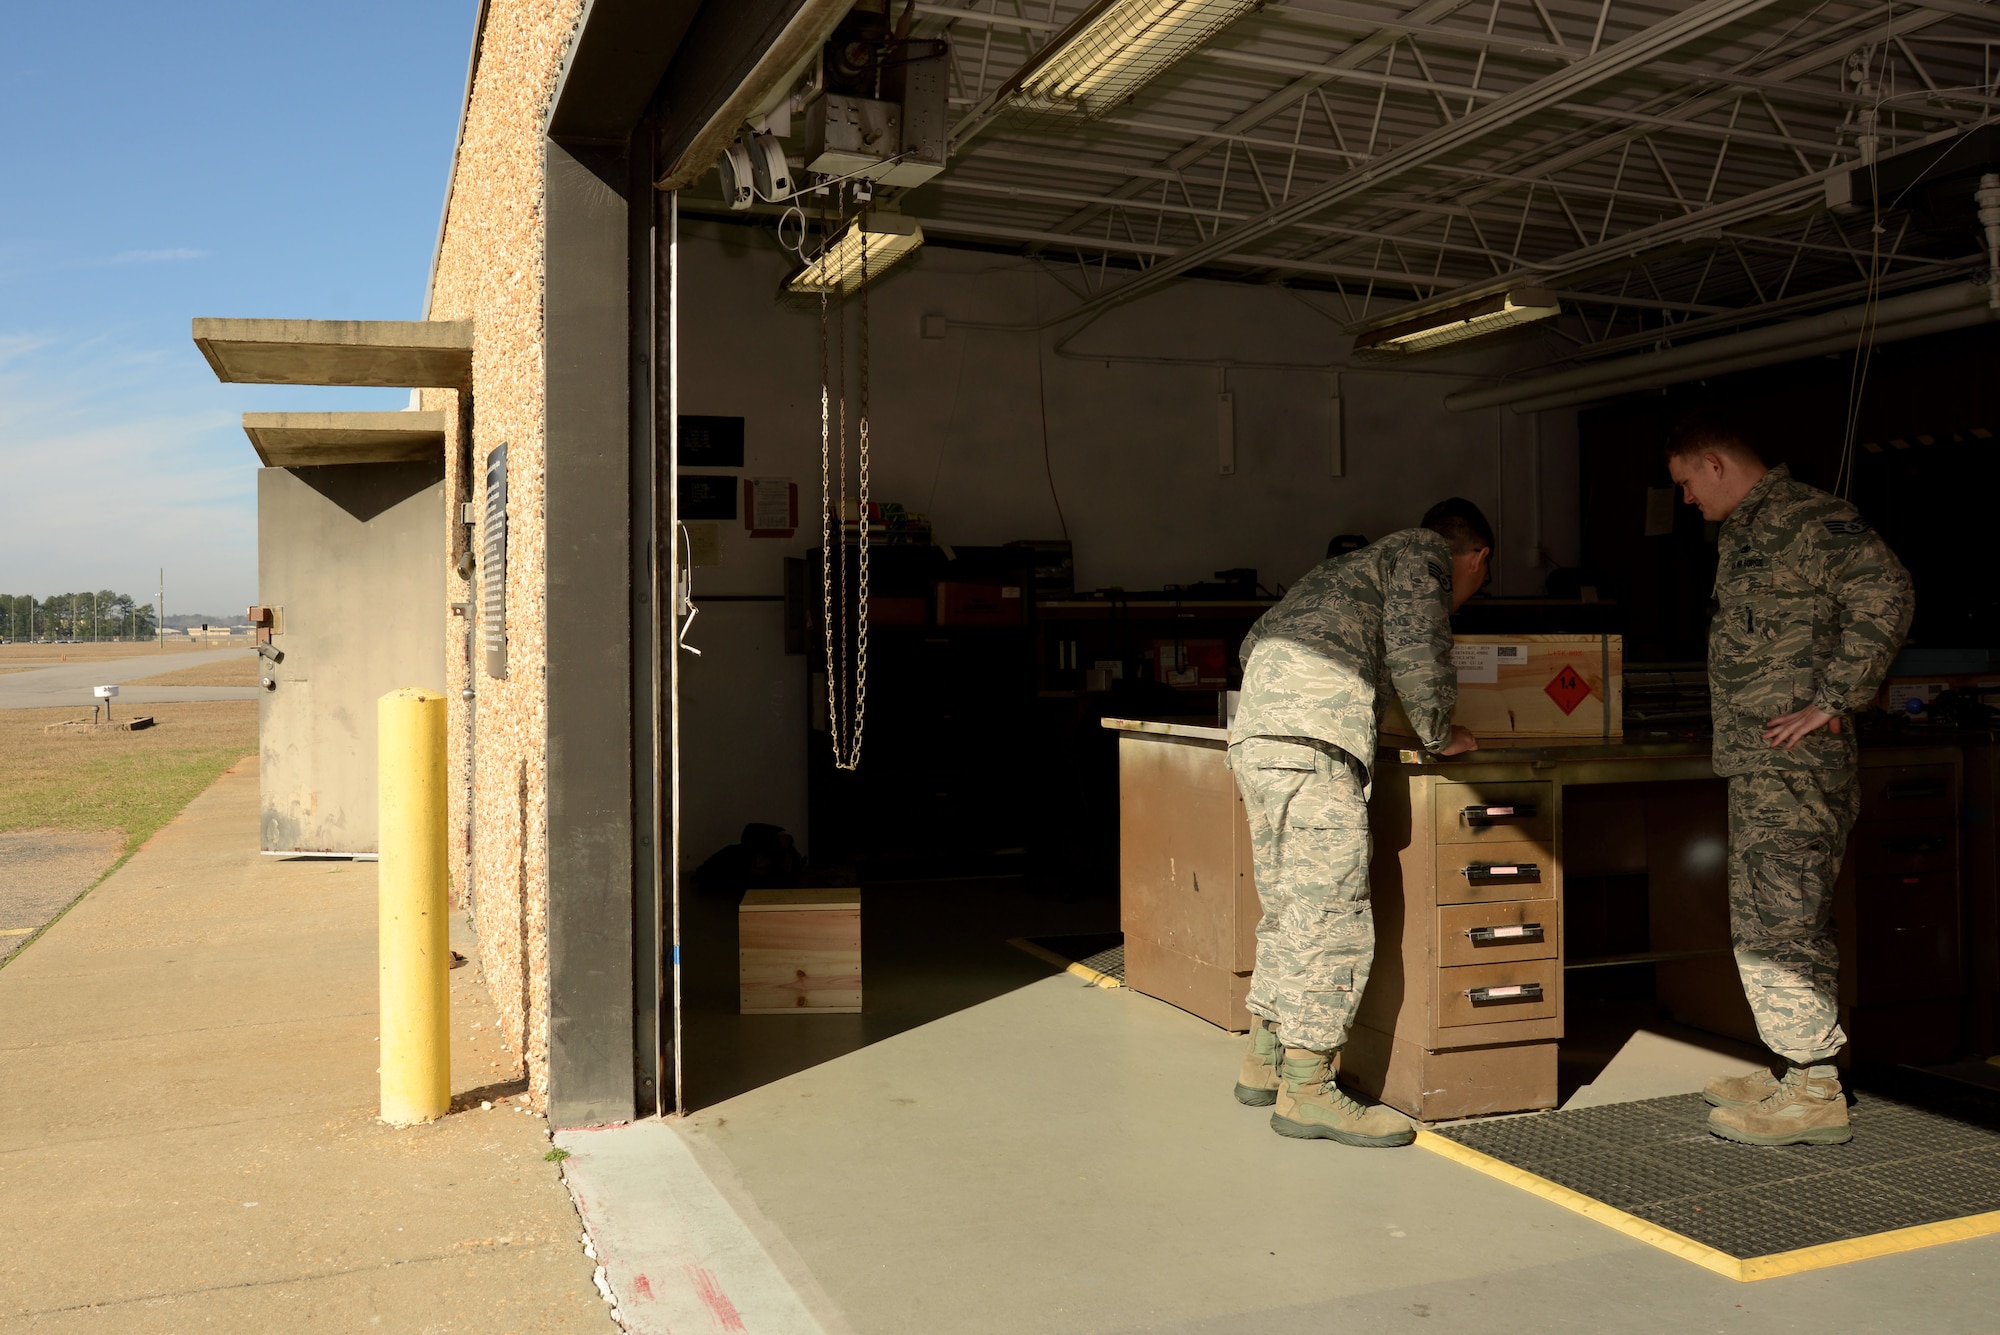 U.S. Air Force Staff Sgt. Ralph Simons, left, and Staff Sgt. Cameron Miller, right, 20th Equipment Maintenance Squadron munitions inspectors, review a crate of munitions at Shaw Air Force Base, S.C., Feb. 6, 2017. The outside of the crate indicates factors such as the munition’s type, count, national stock number and hazard class. (U.S. Air Force photo by Airman 1st Class Kathryn R.C. Reaves)